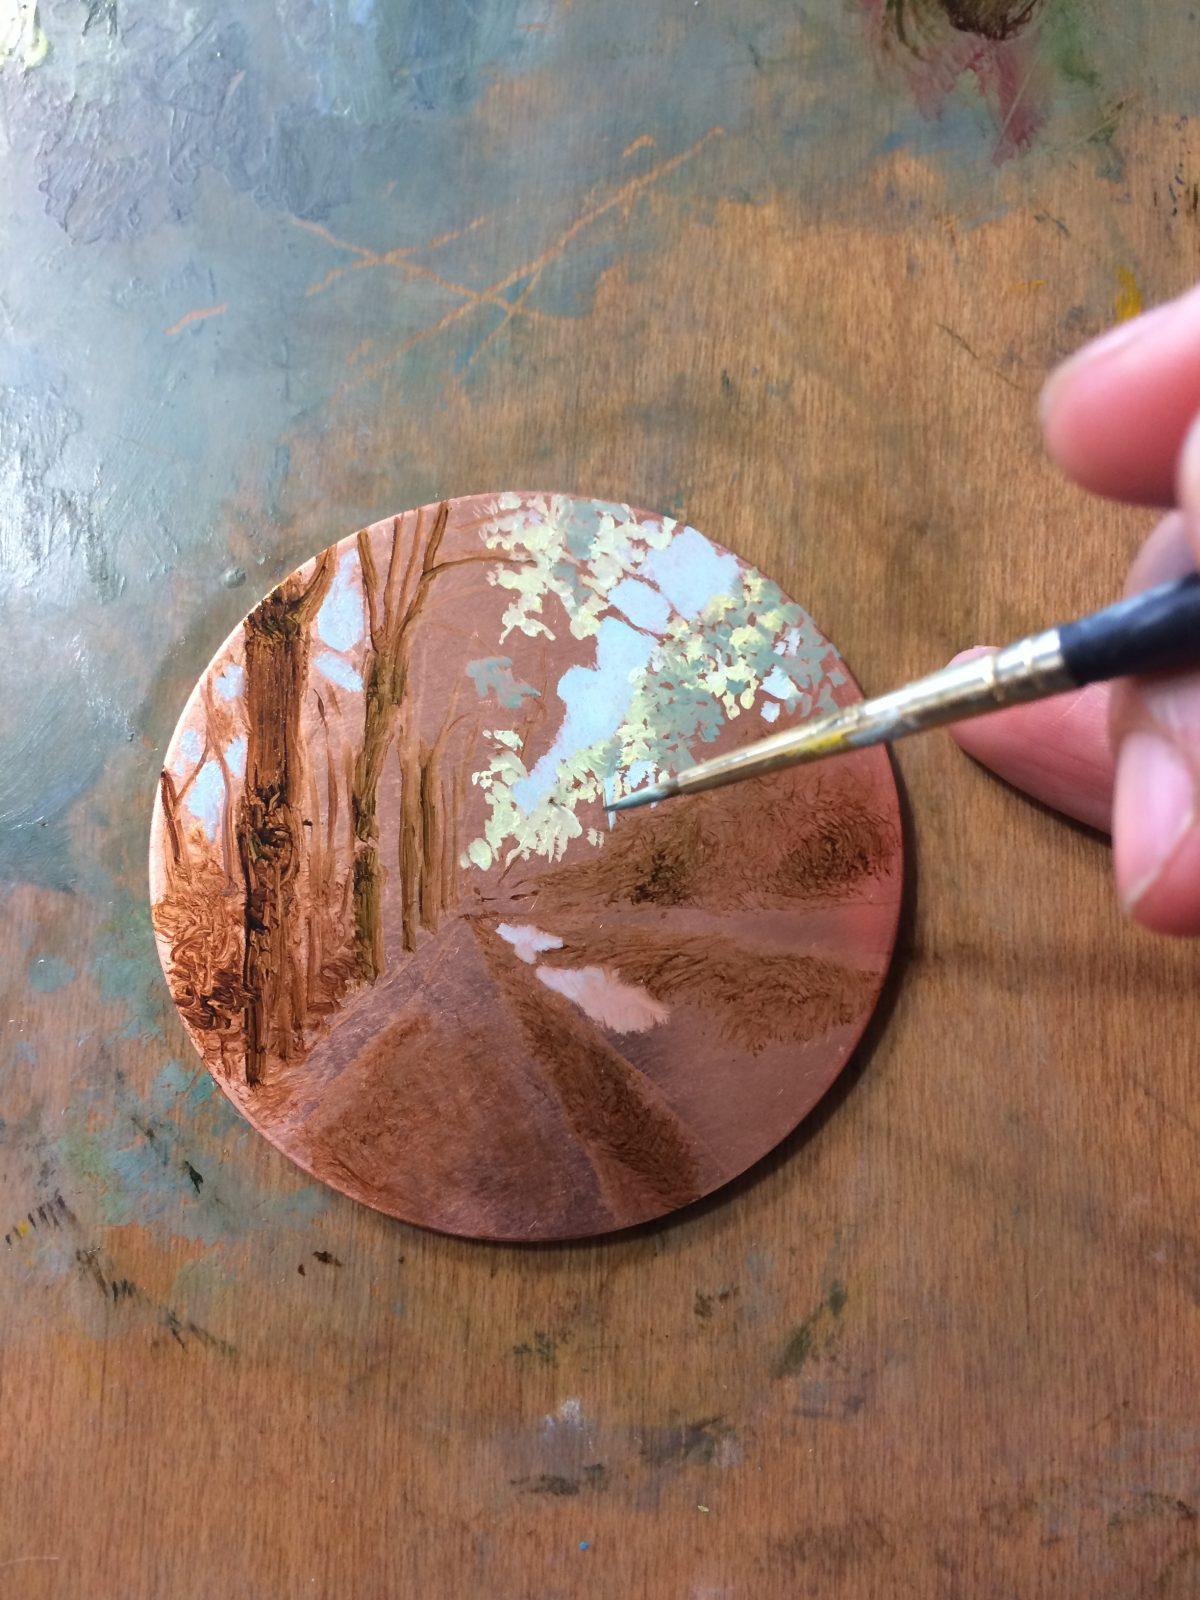 Dina Brodsky works on an oil painting on copper. (Courtesy of Dina Brodsky)<span style="color: #ff0000;"> </span>